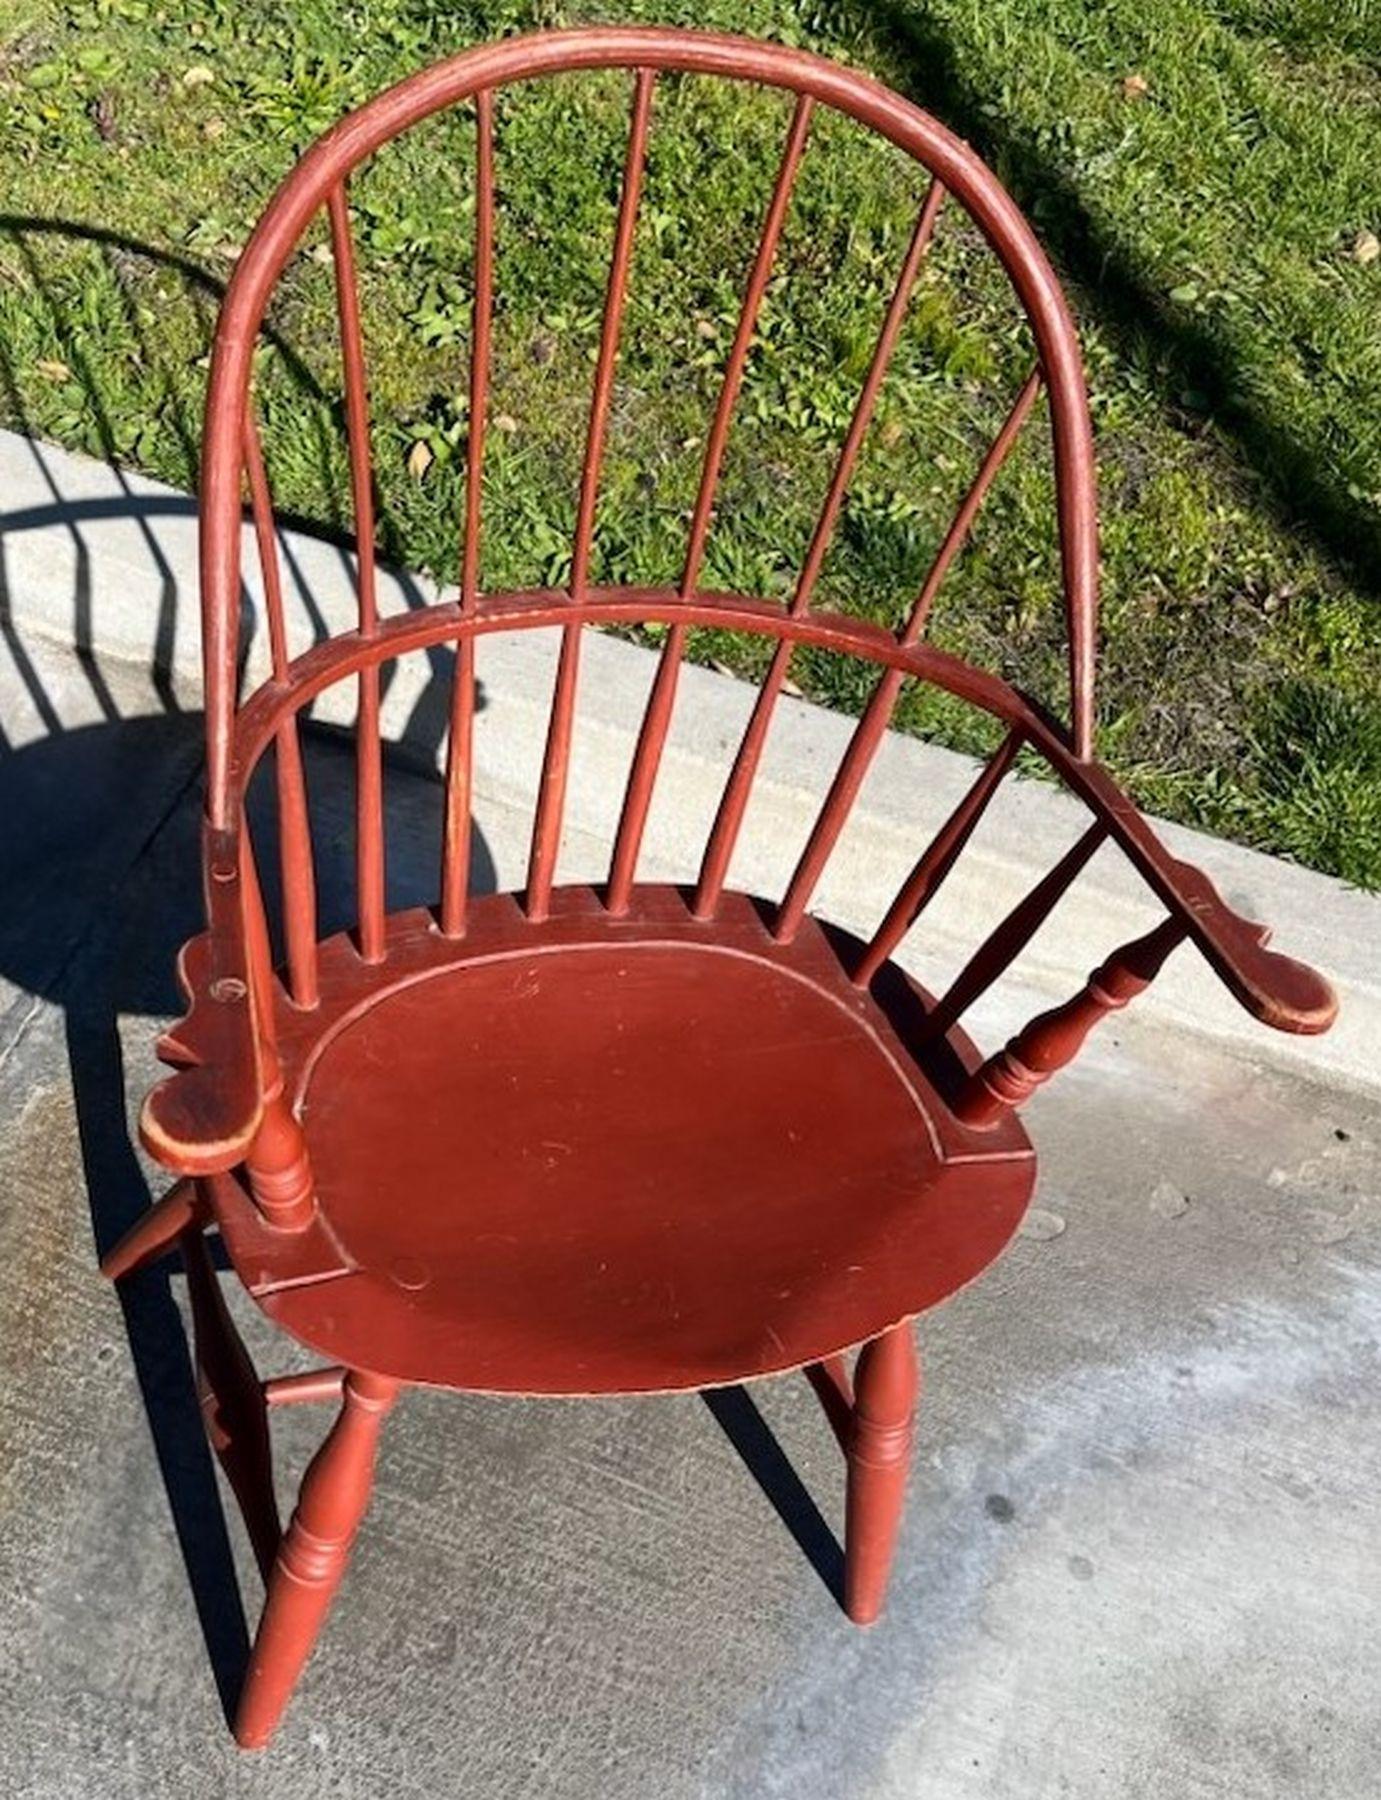 This fine red painted 19thc Windsor arm chair is in fine and sturdy condition.The later painted surface has been on there for many years and is a fun red color. This chair is very comfortable.